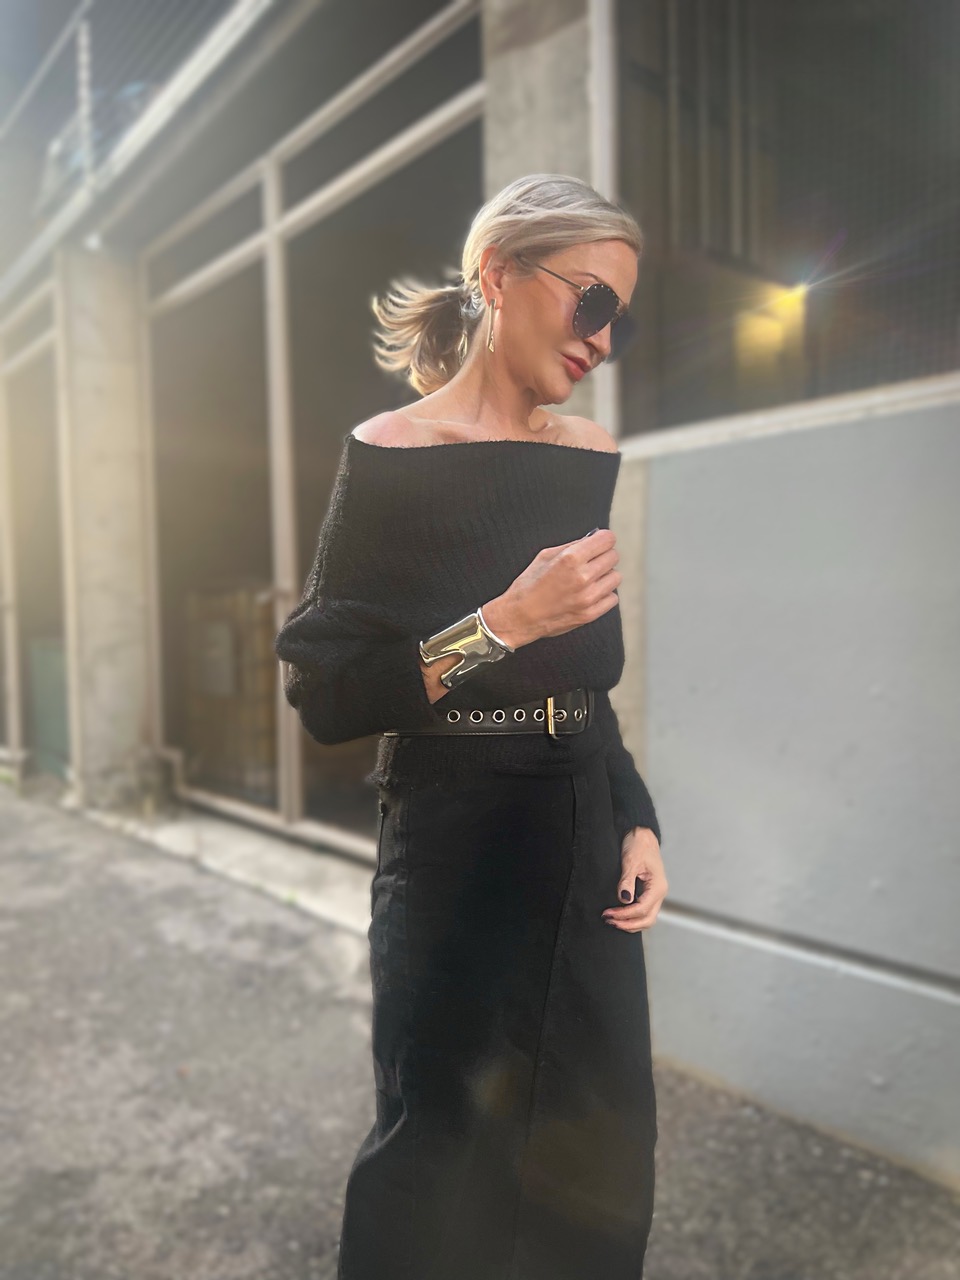 Lifestyle Influencer, Jamie Lewinger of More Than Turquoise wearing Elsa Peretti large bone cuff from Tiffany and Co.